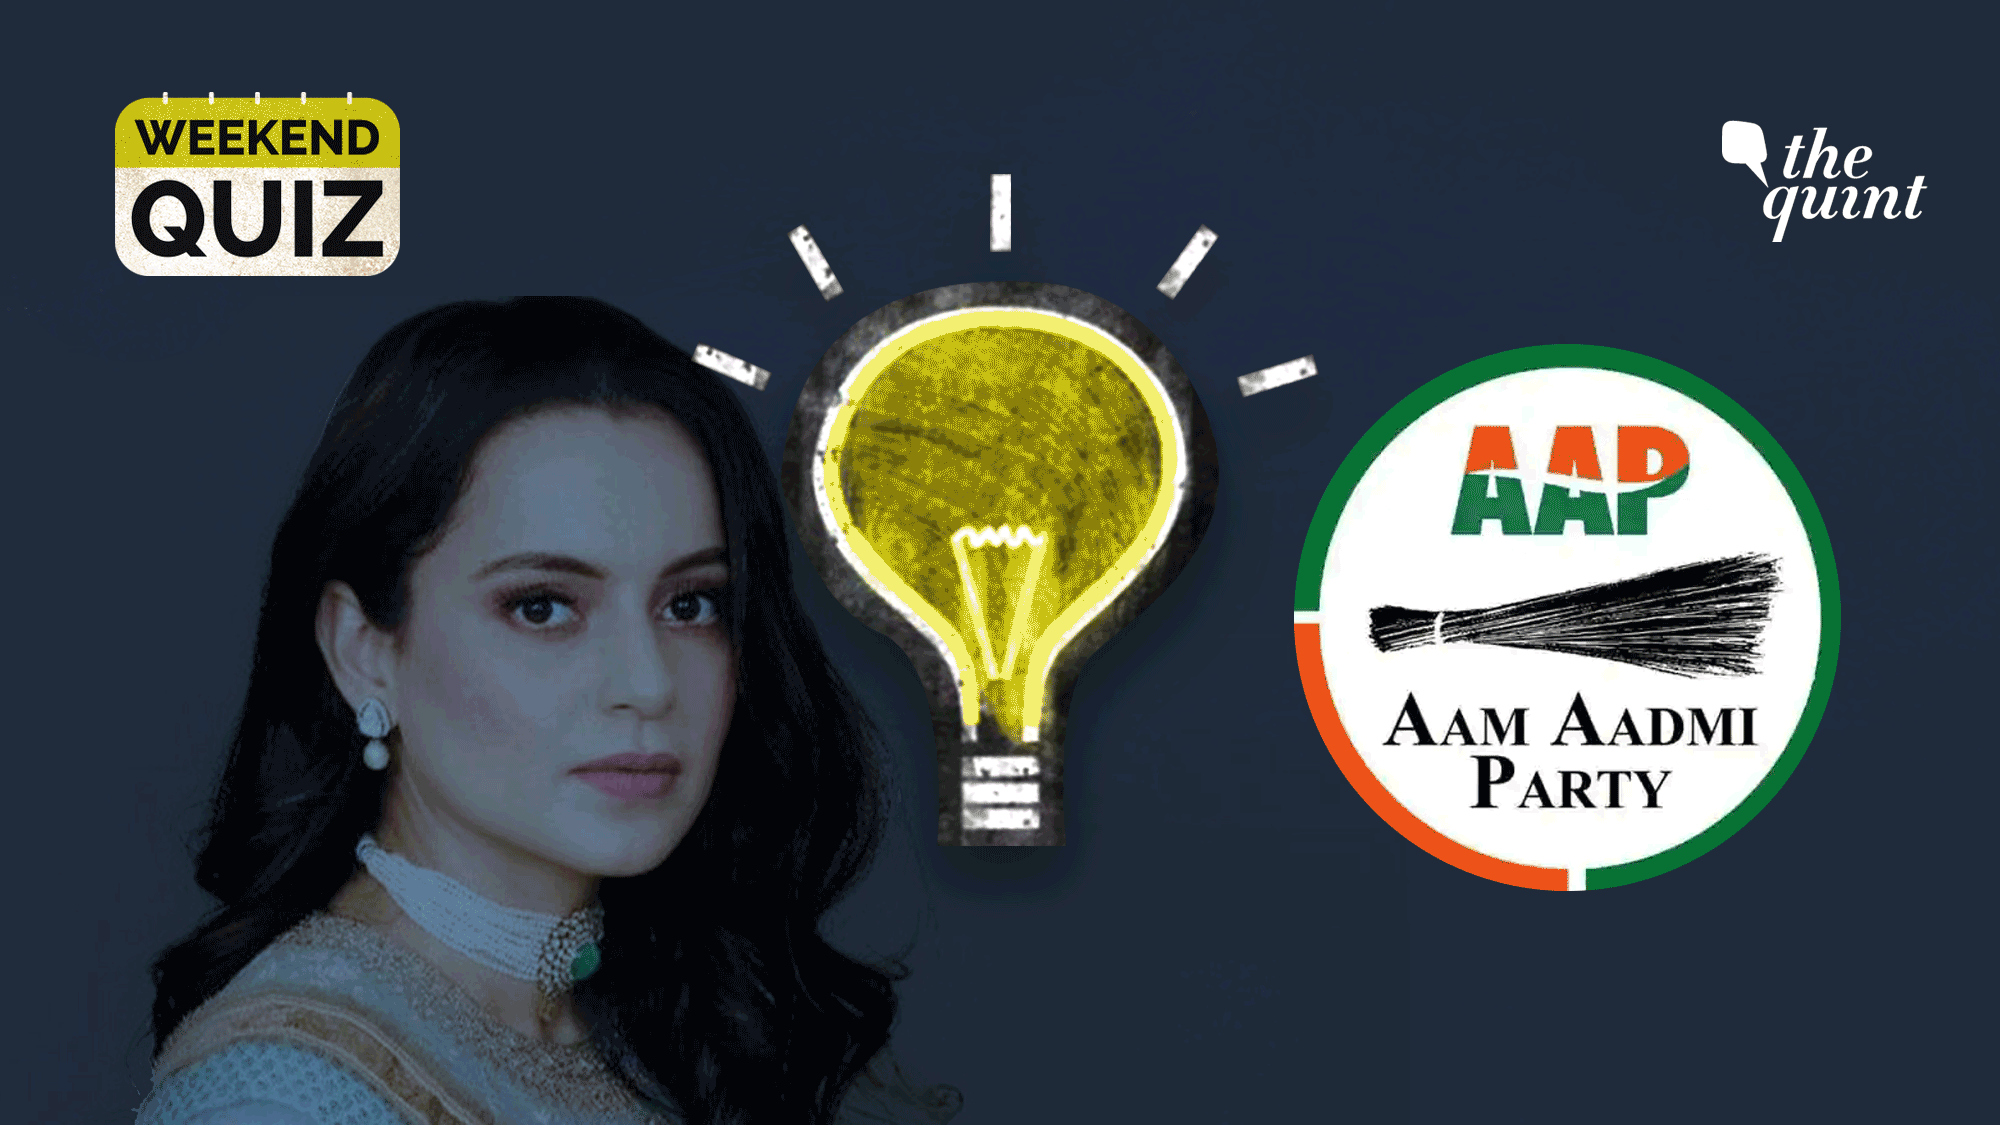 From Kangana Ranaut winning a national award to investigations into the privacy update of a social media giant, have you been tracking the news this week?